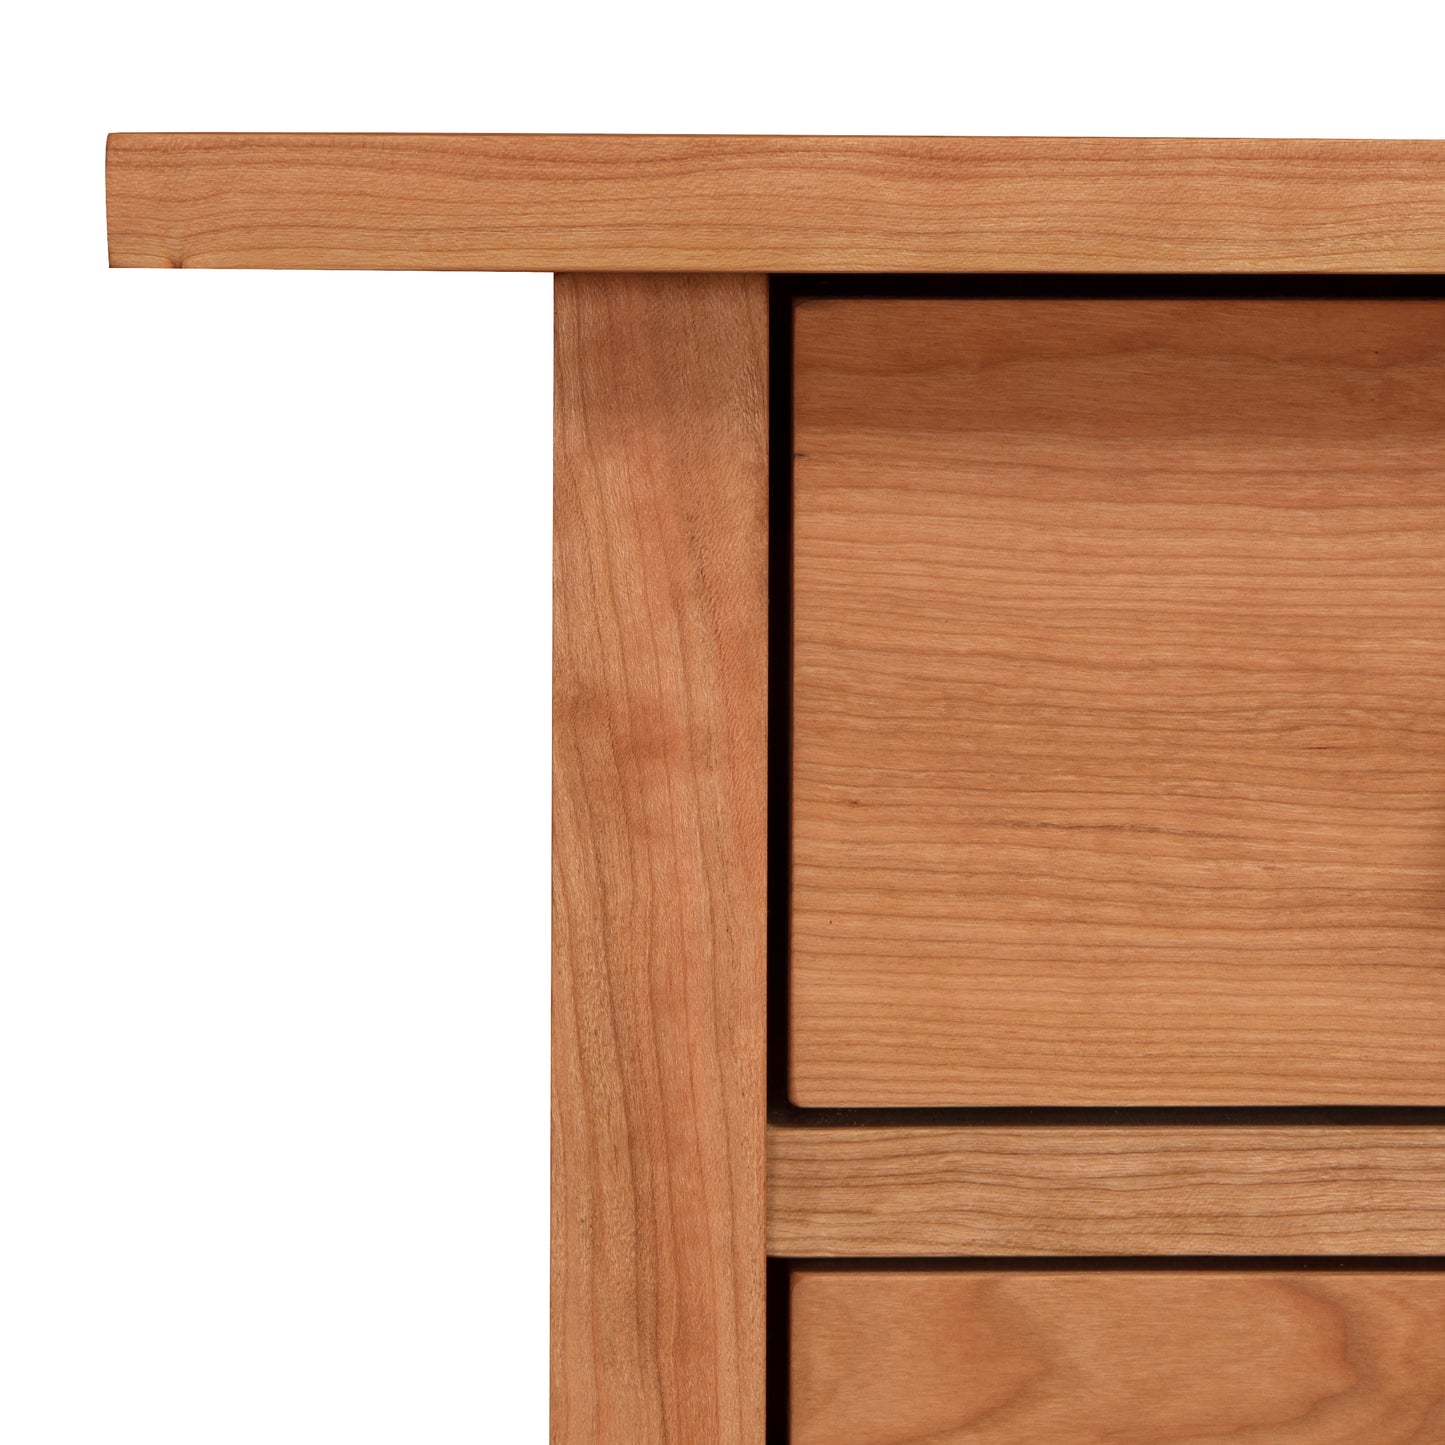 Wooden Modern Craftsman 3-Drawer Nightstand, showcasing the wood grain and design detail of Vermont Furniture Designs' eco-friendly furniture, isolated on a white background.